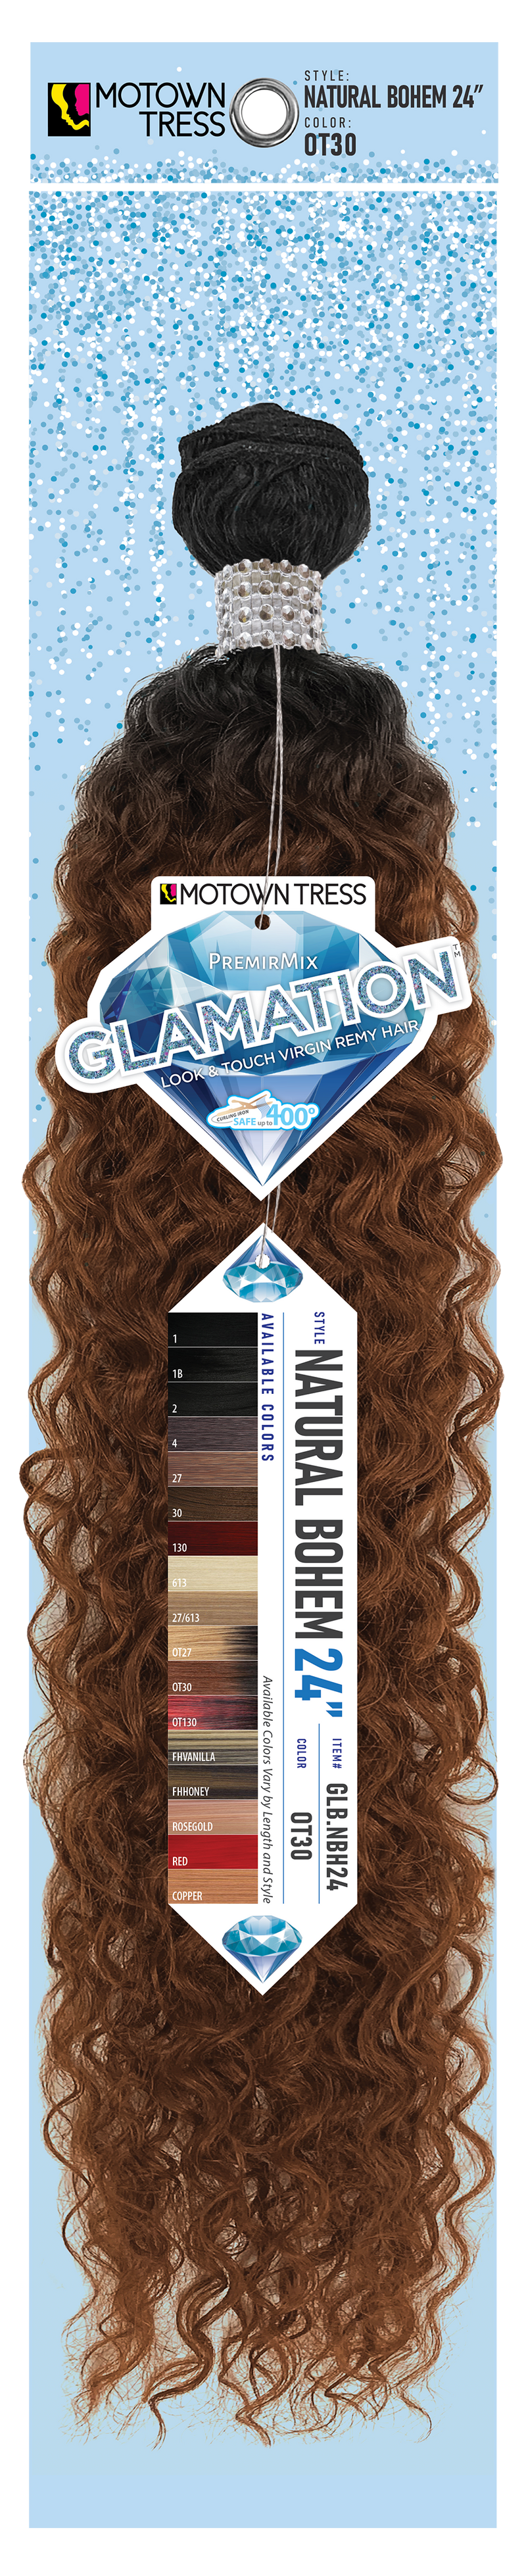 GLAMATION WEAVE_NATURAL BOHEMIAN CURL